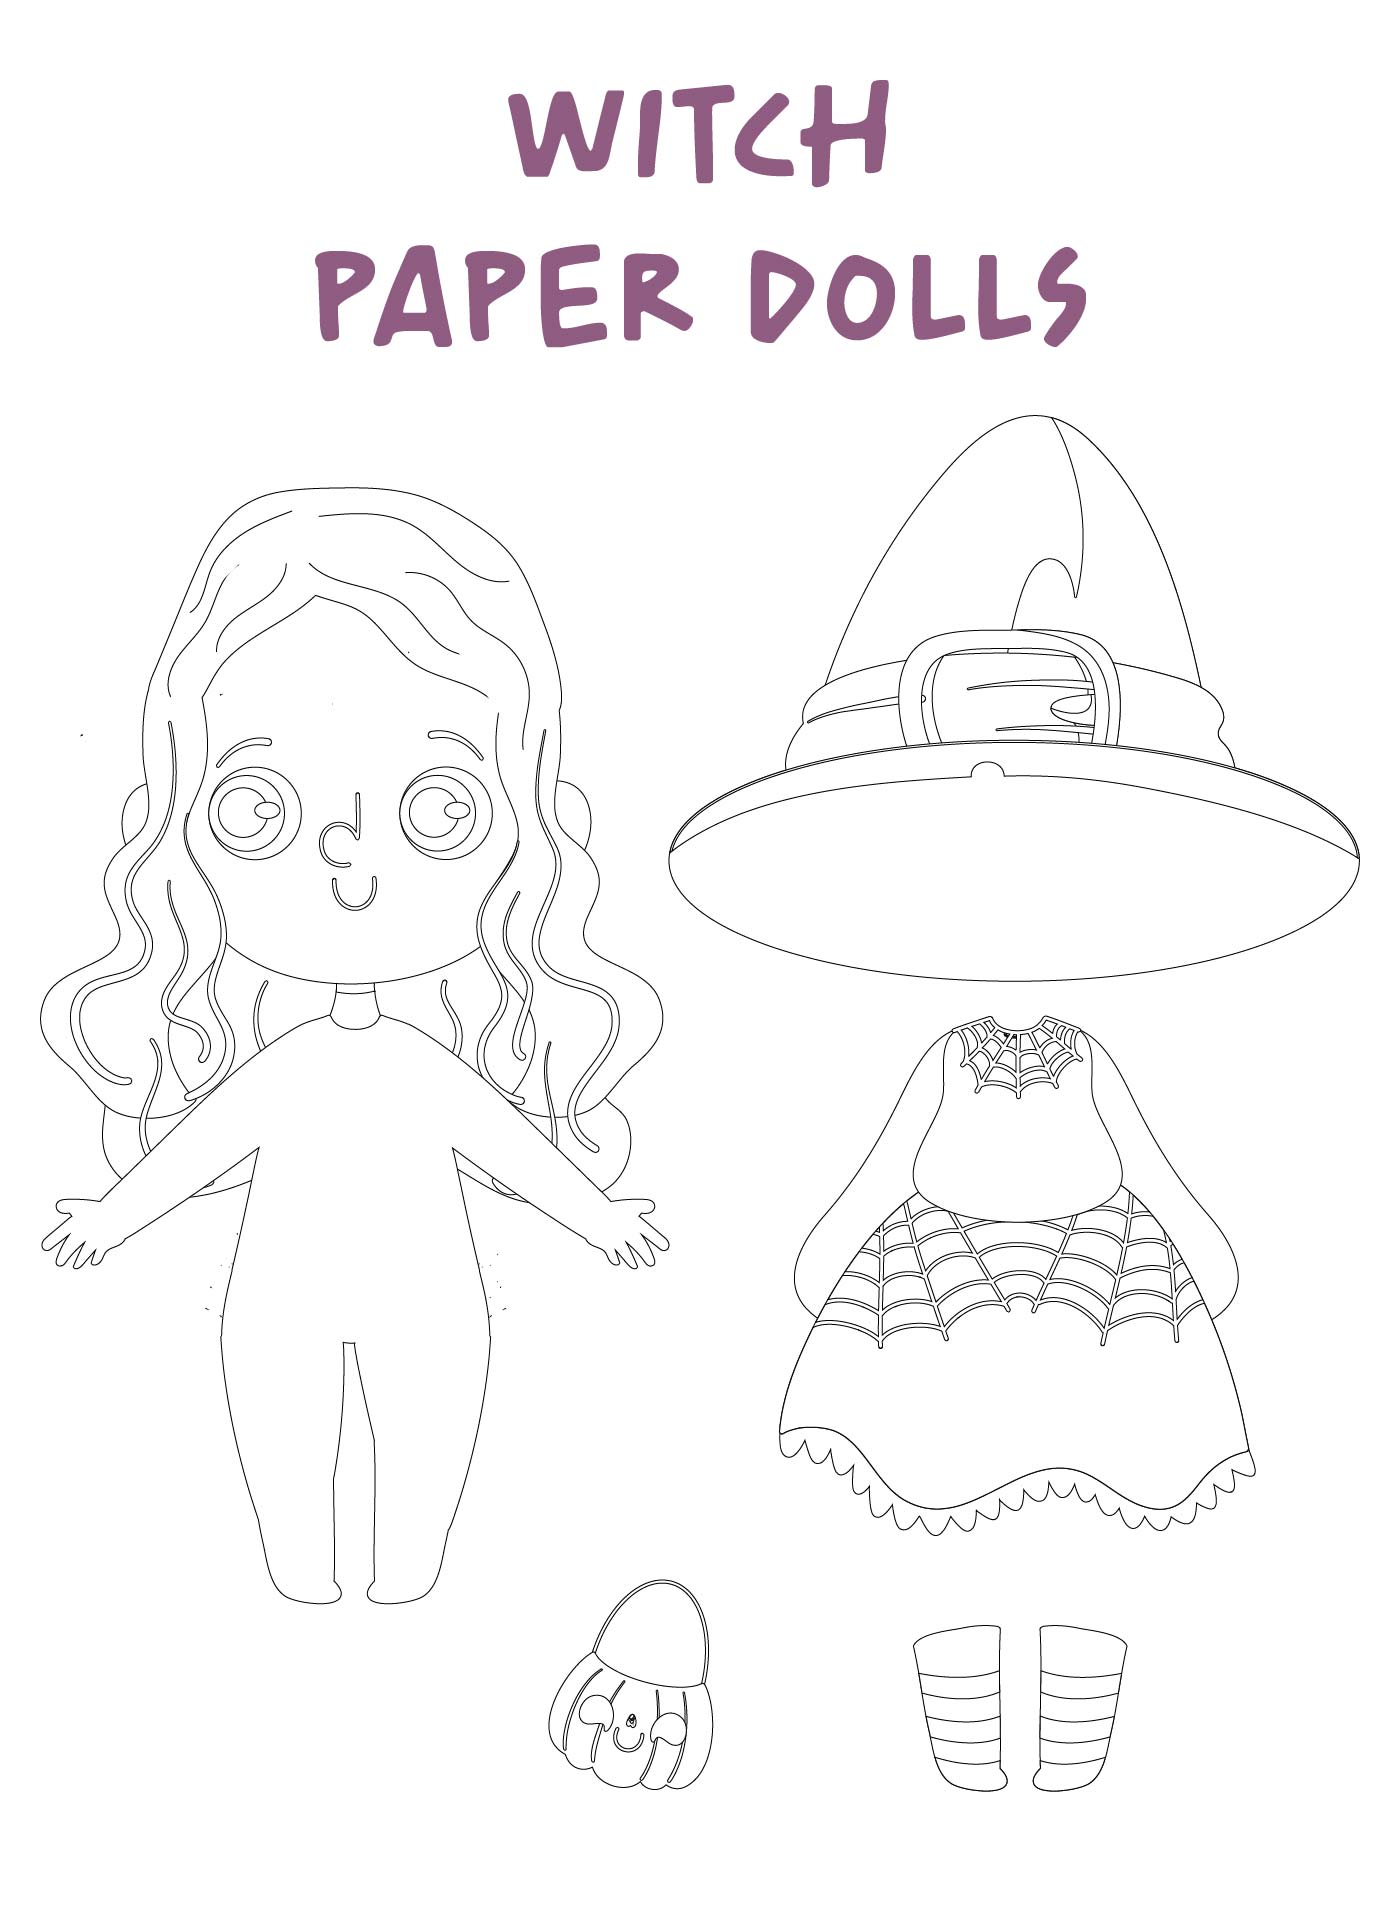 Printable Color Your Own Halloween Paper Dolls